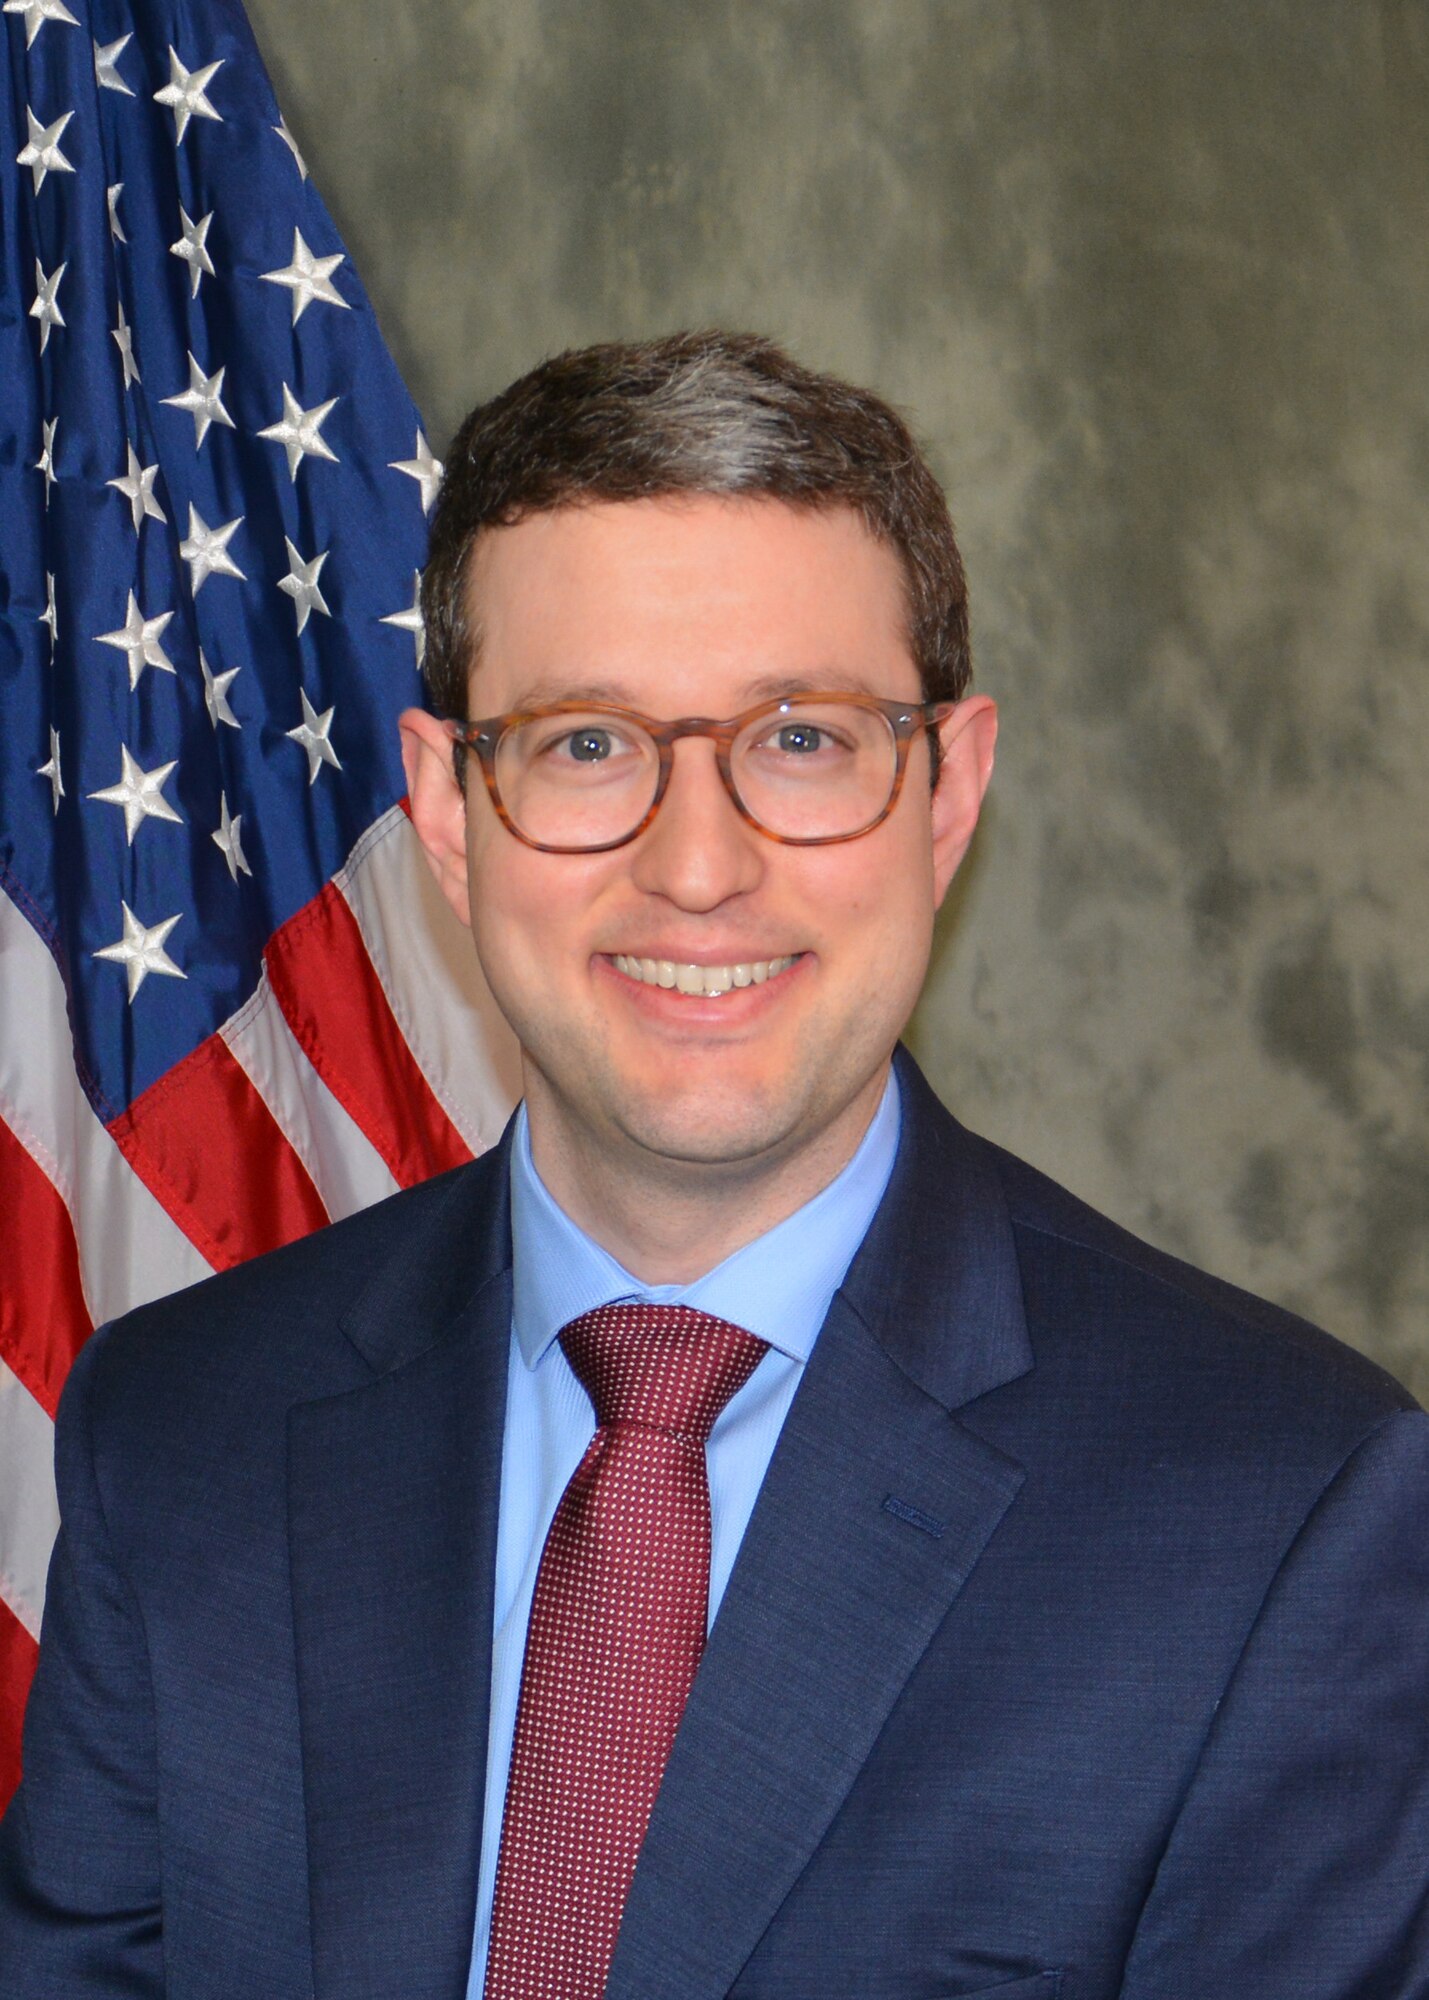 Dr. Sean Donegan of the Air Force Research Laboratory, is a participant in the NAE 2020 US Frontiers of Engineering Symposium.  He is a research materials engineer and lead for a Center of Excellence in machine learning for materials science with Carnegie Mellon University. (Courtesy photo)